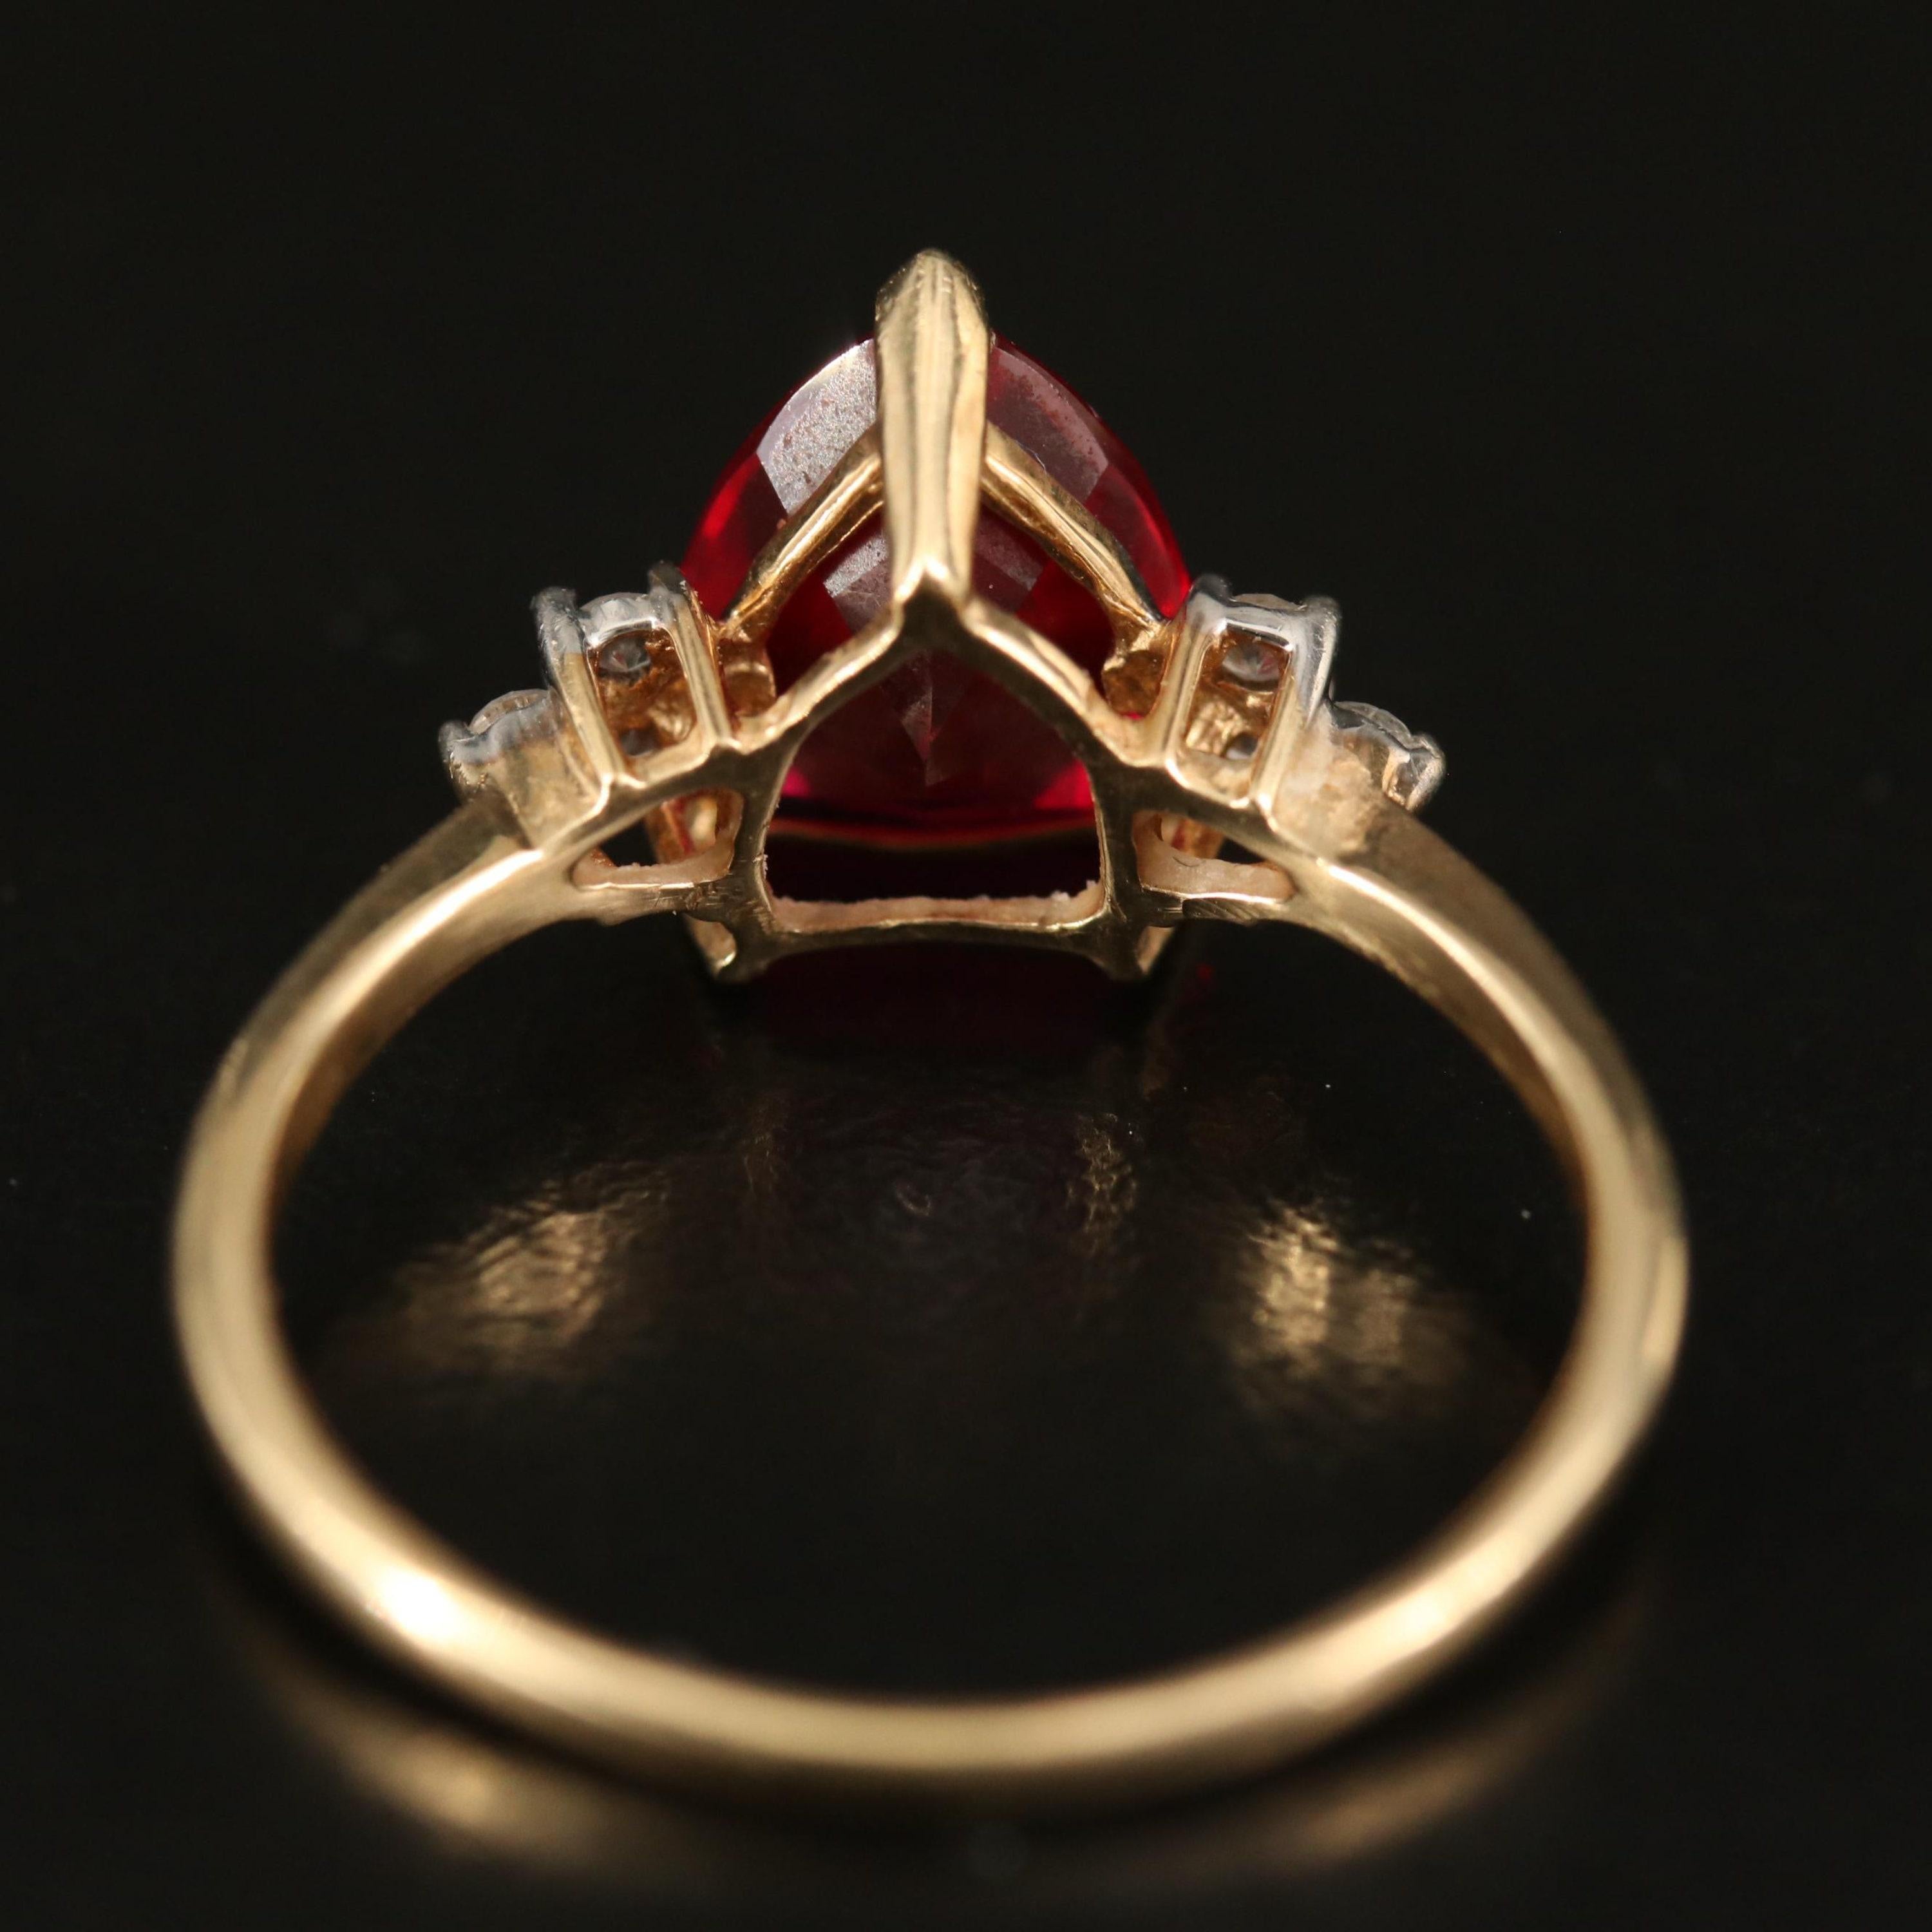 For Sale:  2 Carat Trilliant Cut Ruby Diamond Engagement Ring Antique Victorian Ruby Ring 4